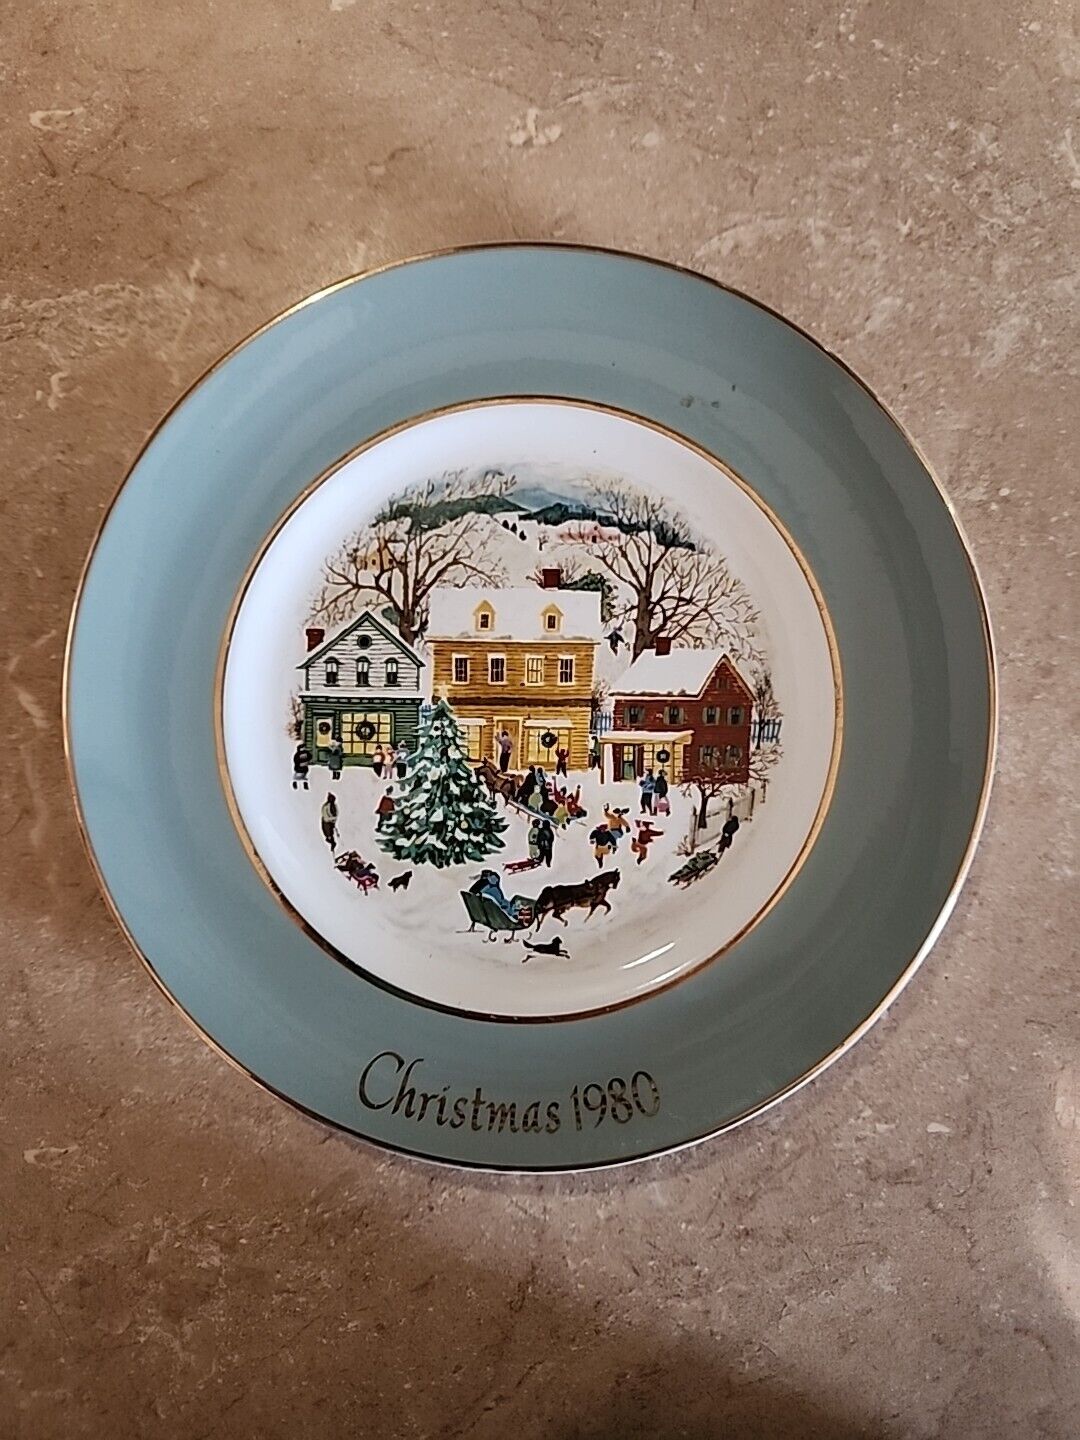 AVON PRODUCTS, INC 1980 SERIES EIGHTH EDITION COUNTRY CHRISTMAS PLATE